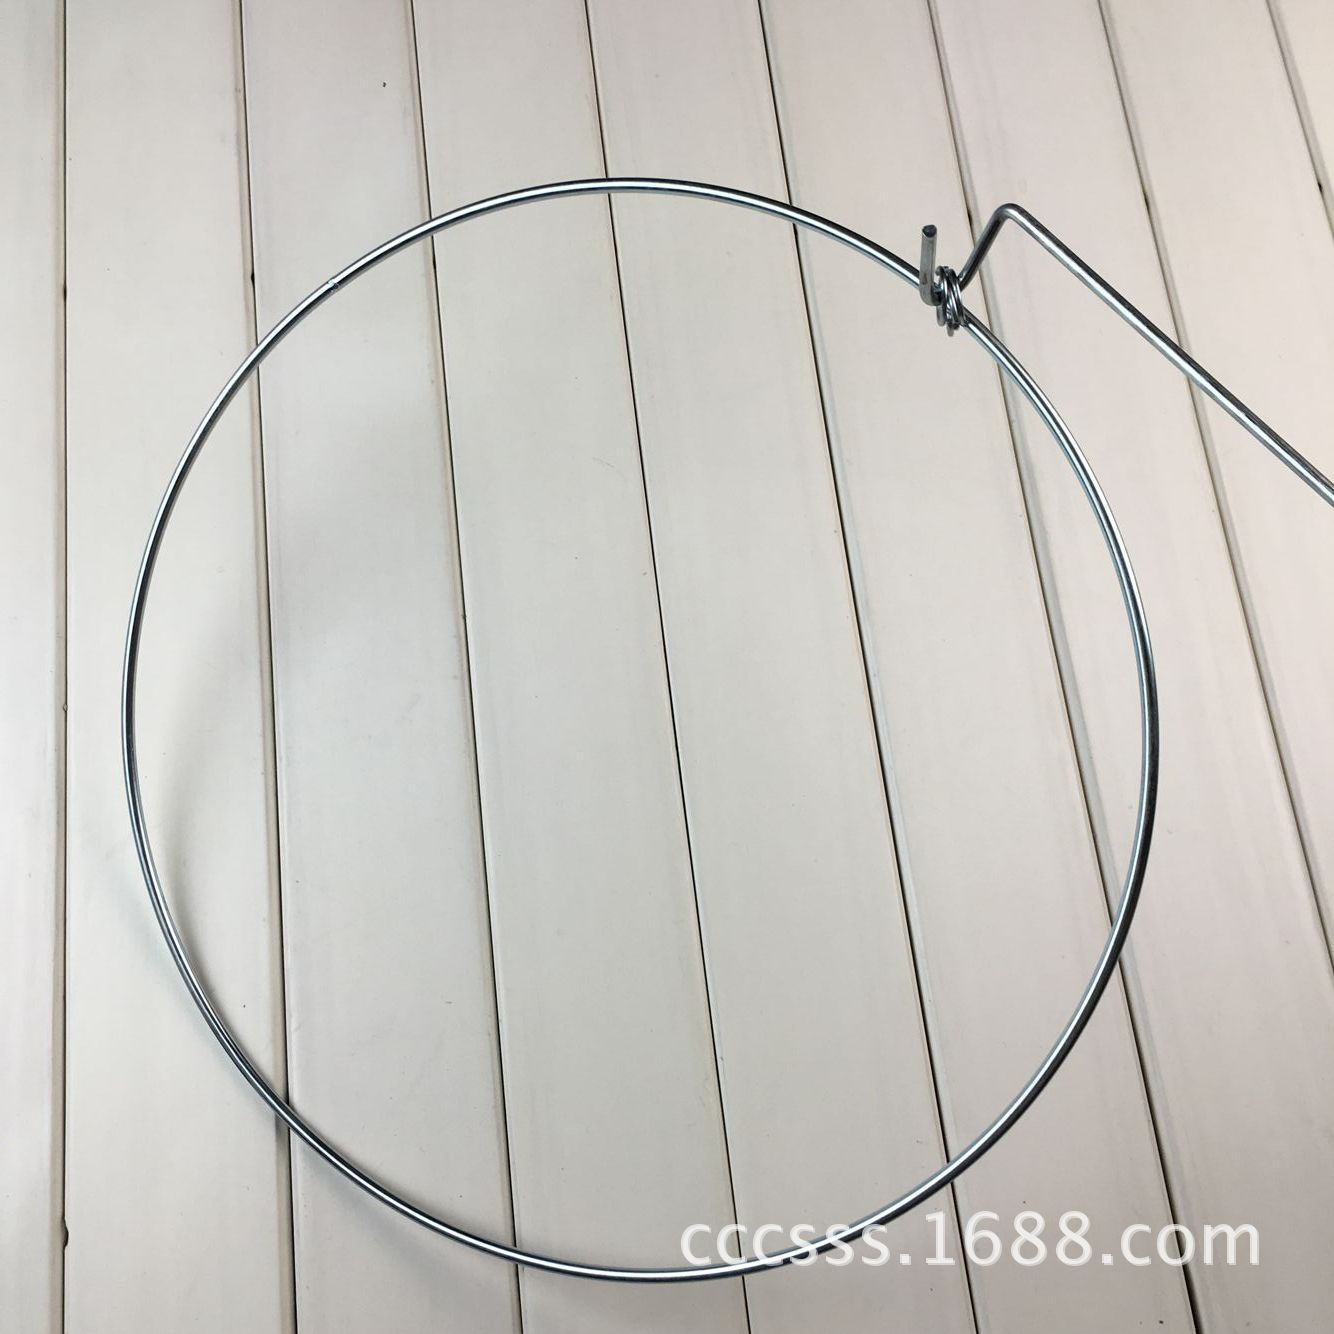 Factory Direct Sales Bold Diameter 38cm with Small Circle Hoop Rolling Children's Nostalgia Classic Toy Iron Ring Wholesale